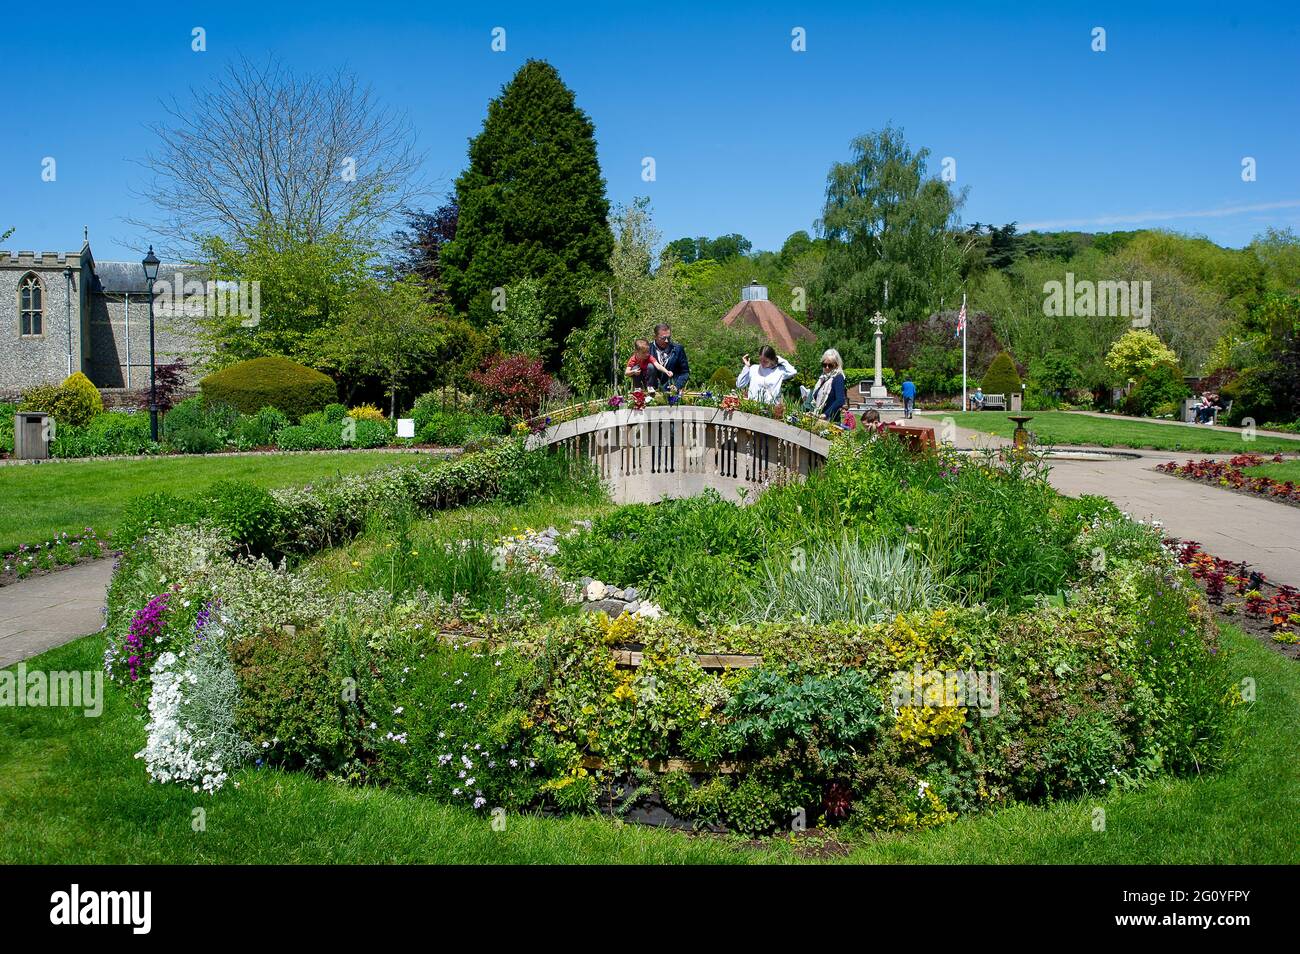 Old Amersham, Buckinghamshire, UK. 29th May, 2021. The Old Amersham Remembrance Gardens. People were out enjoying the beautiful warm sunshine today in Amersham Old Town following the lifting of more of the Covid-19 restrictions. Credit: Maureen McLean/Alamy Stock Photo